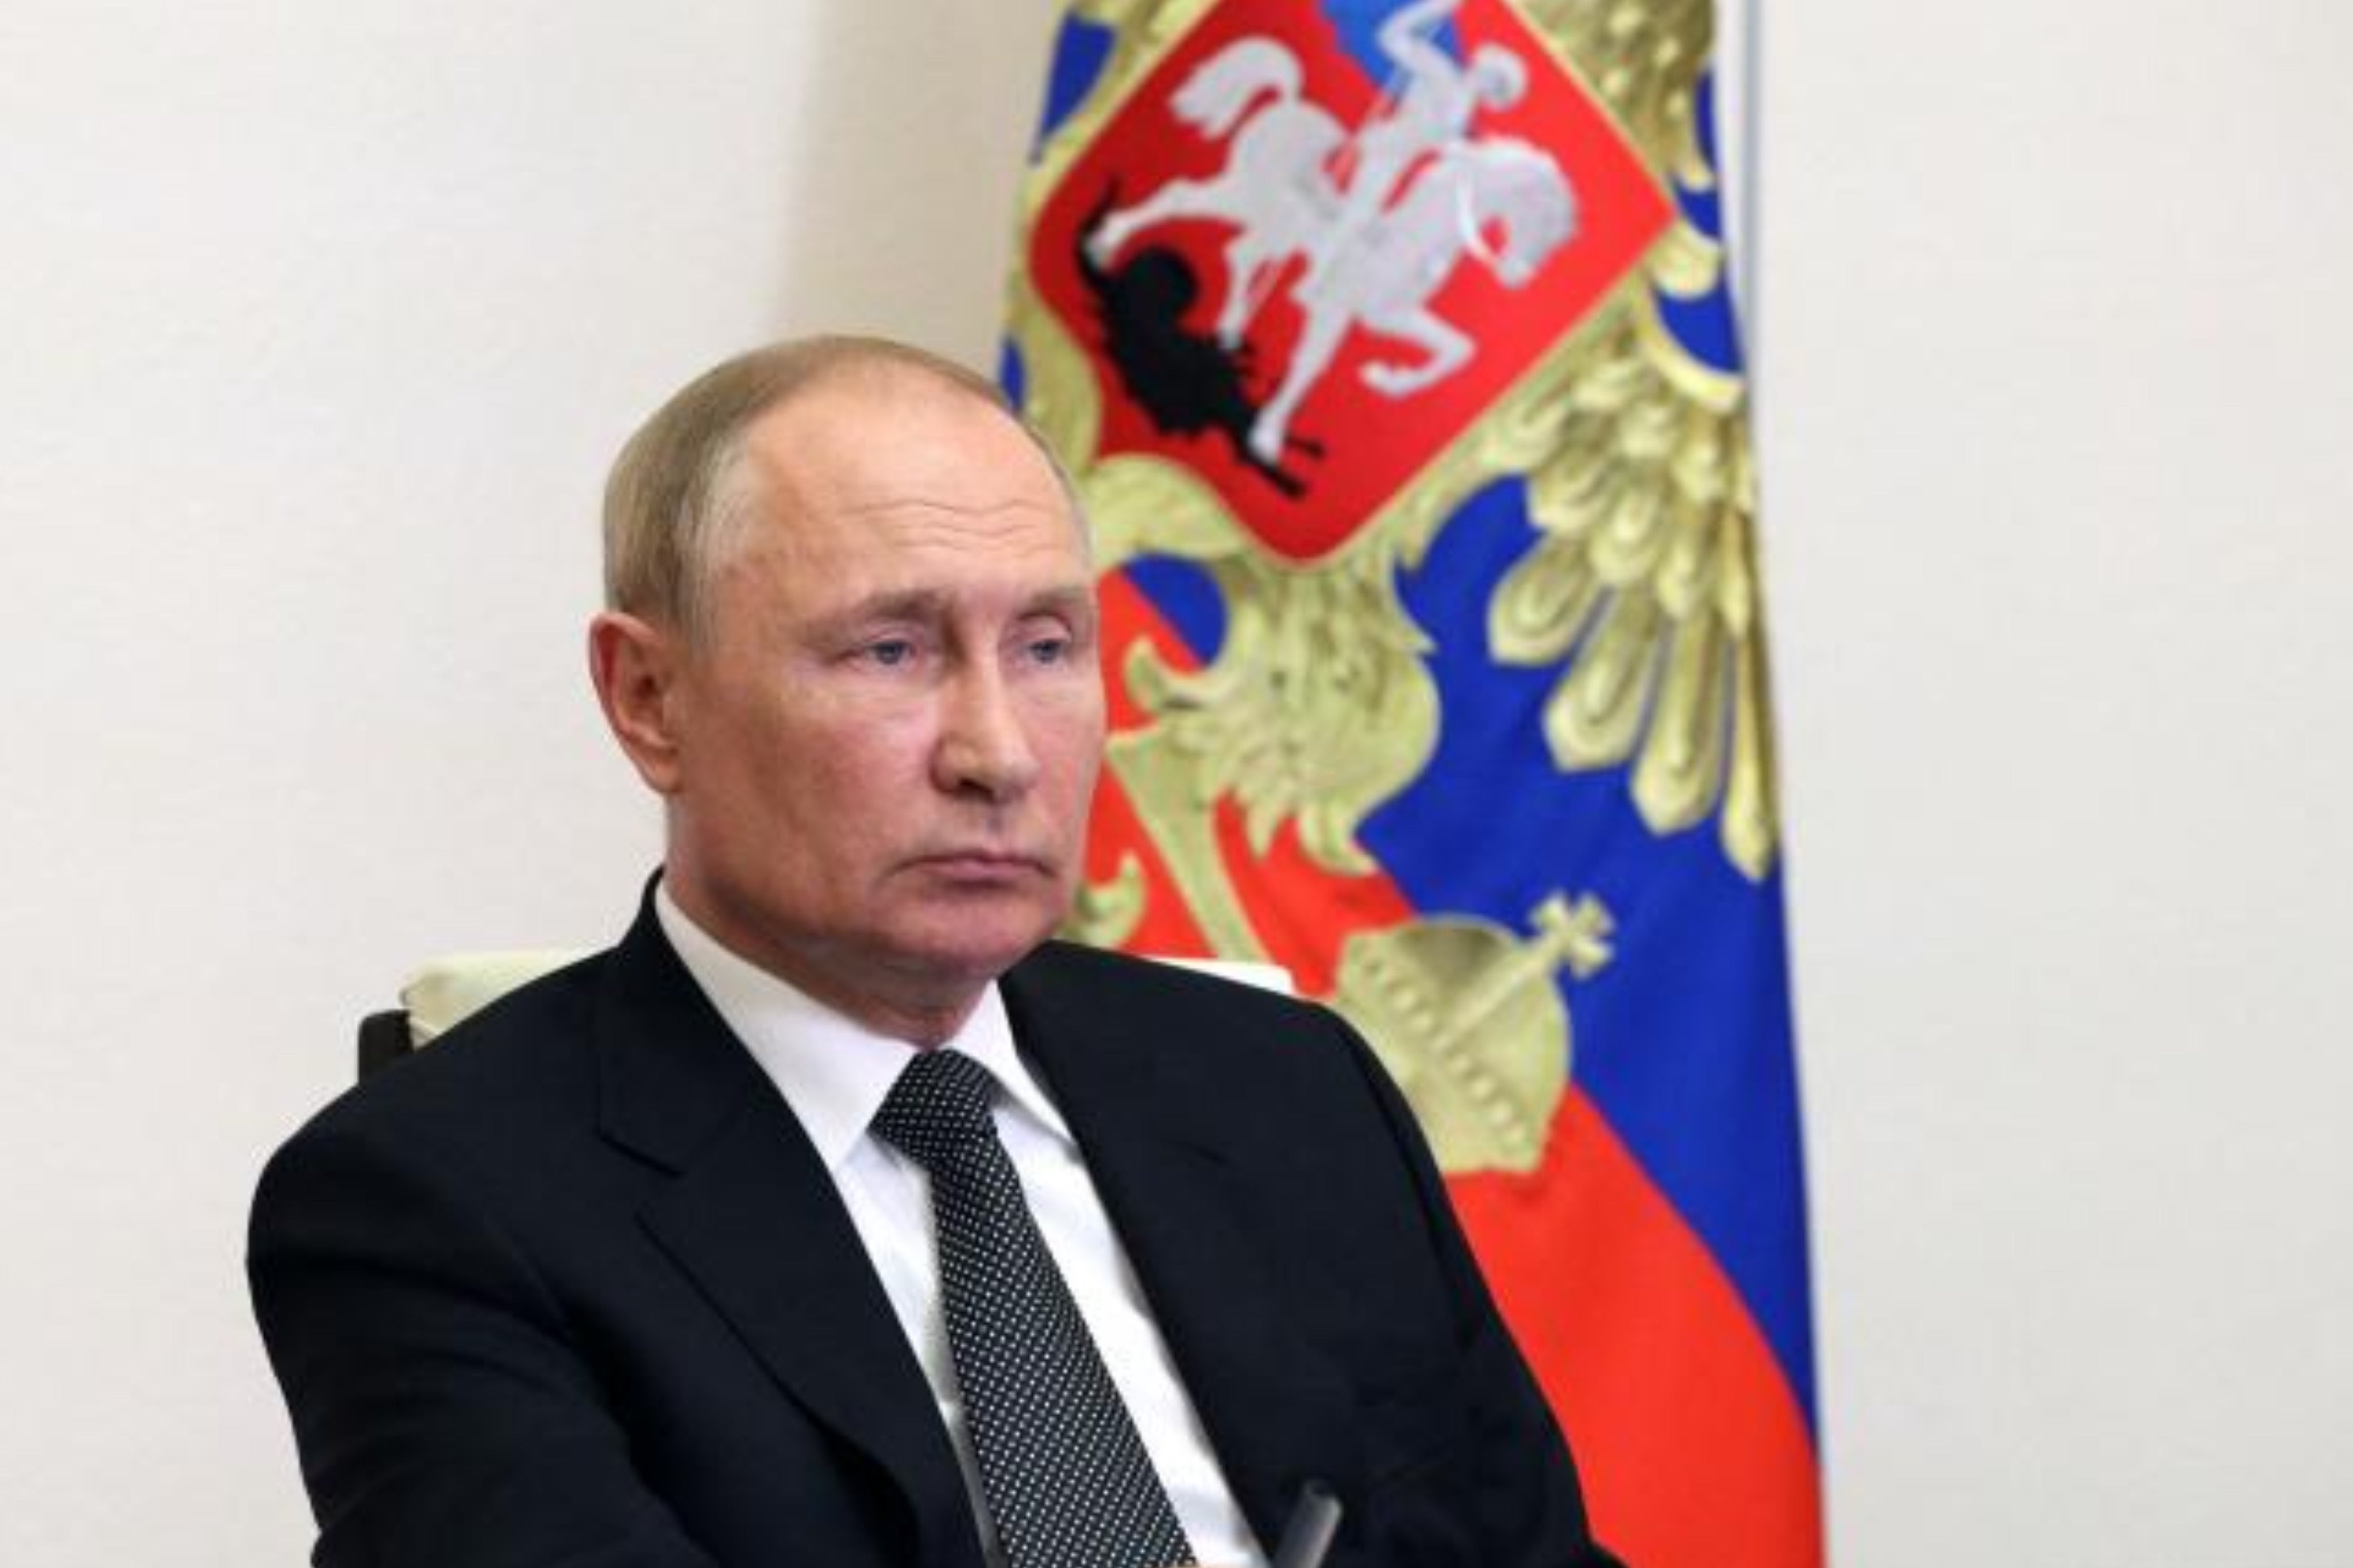 War in Ukraine: Vladimir Putin wants to think about how to put an end to the 